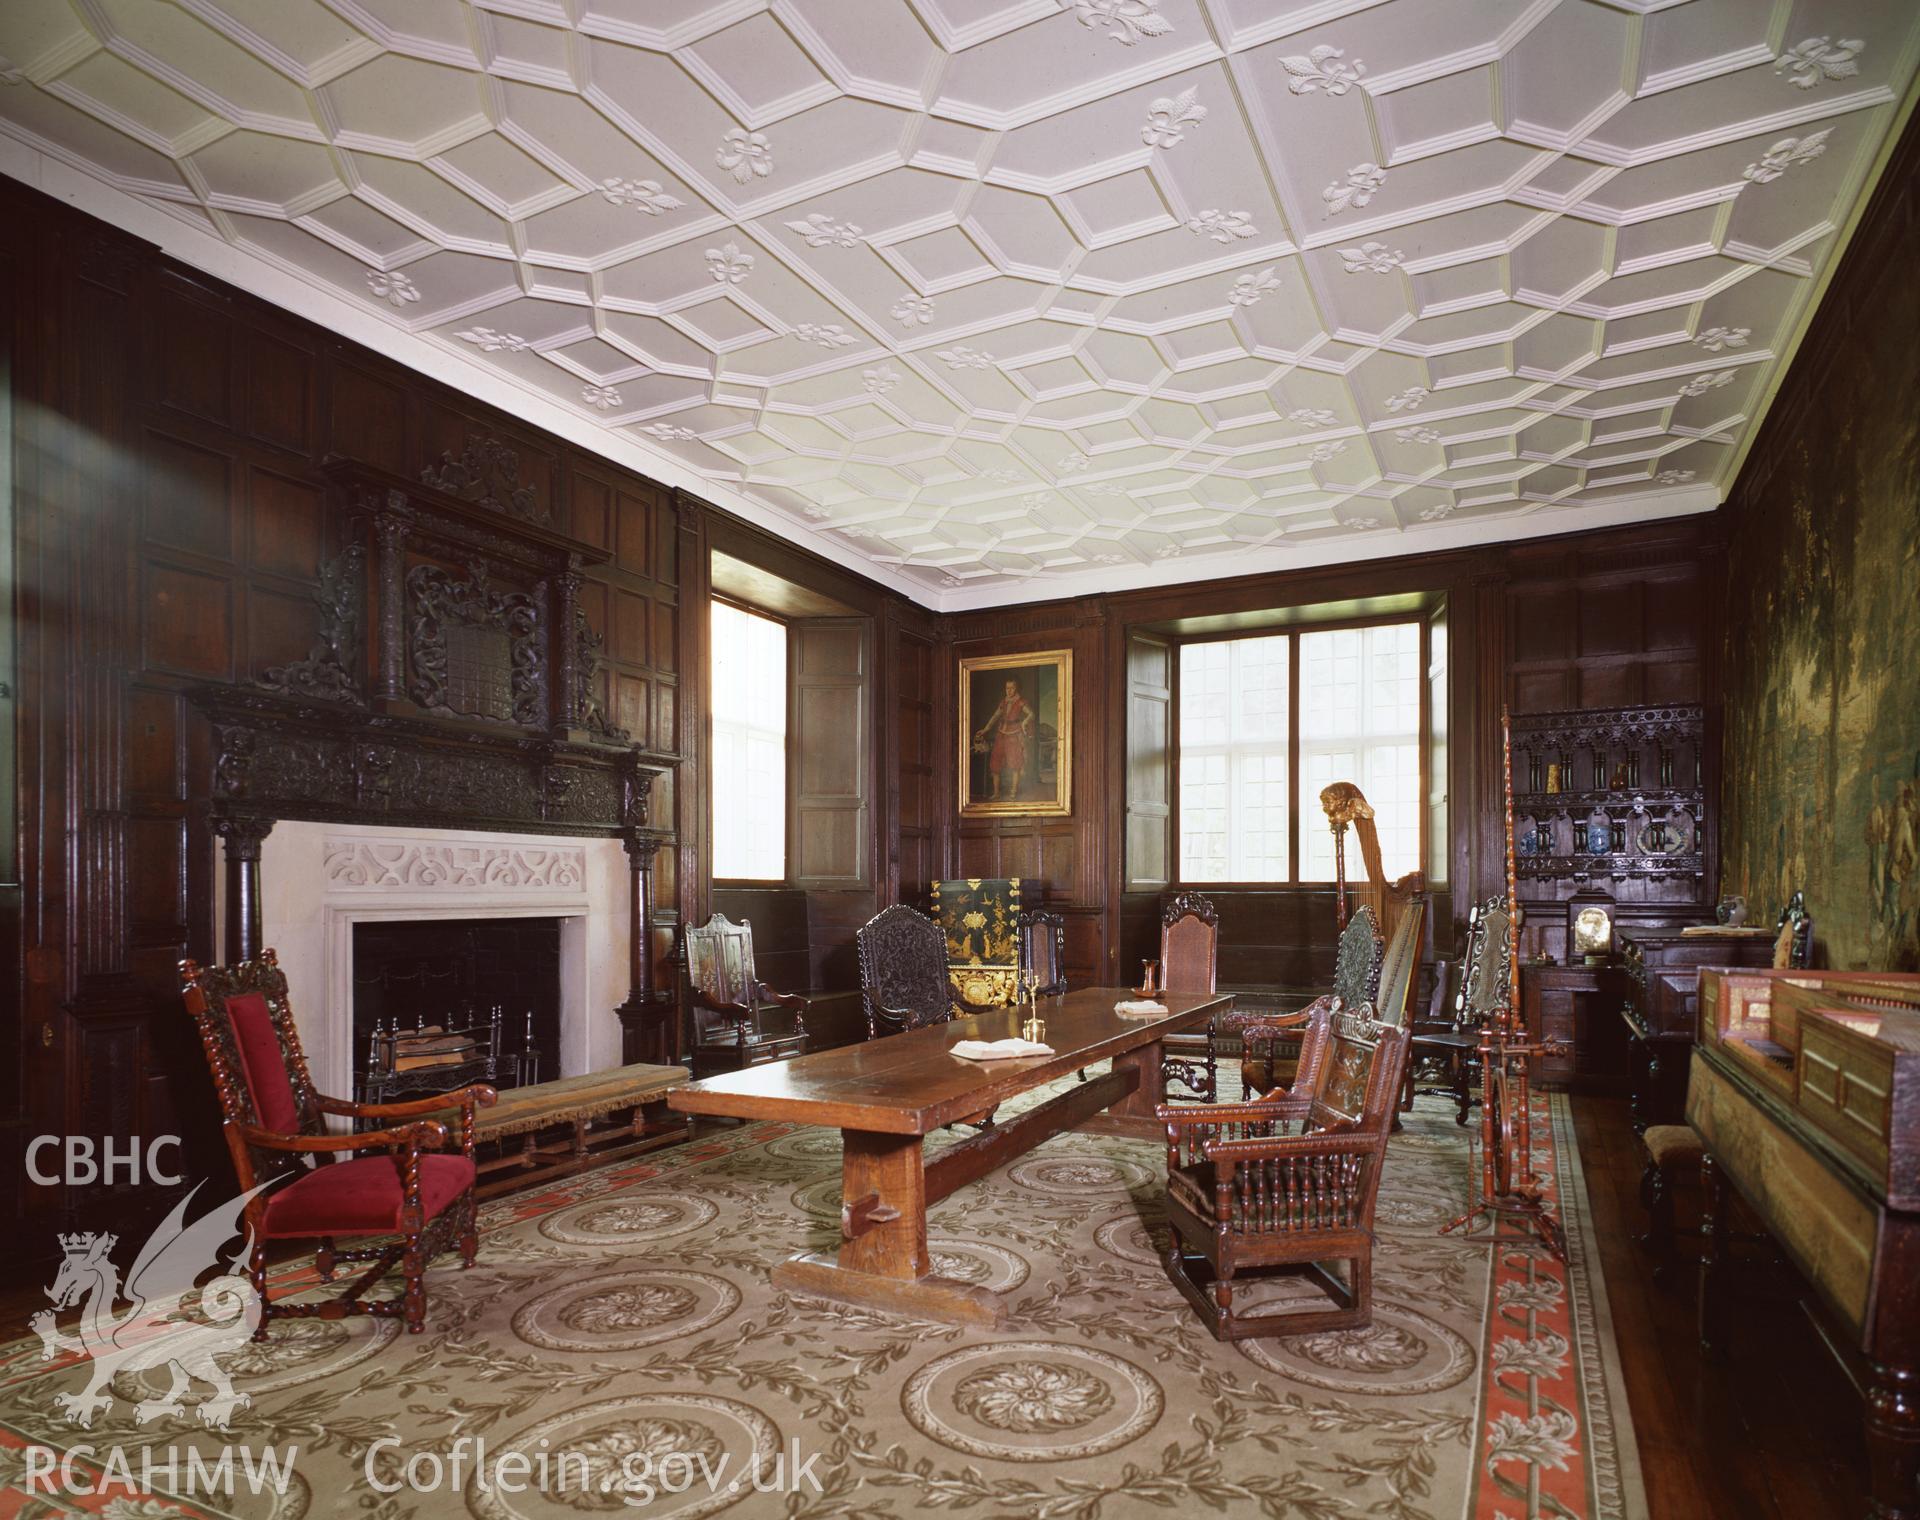 RCAHMW colour transparency showing view of drawing room at St Fagans Castle.